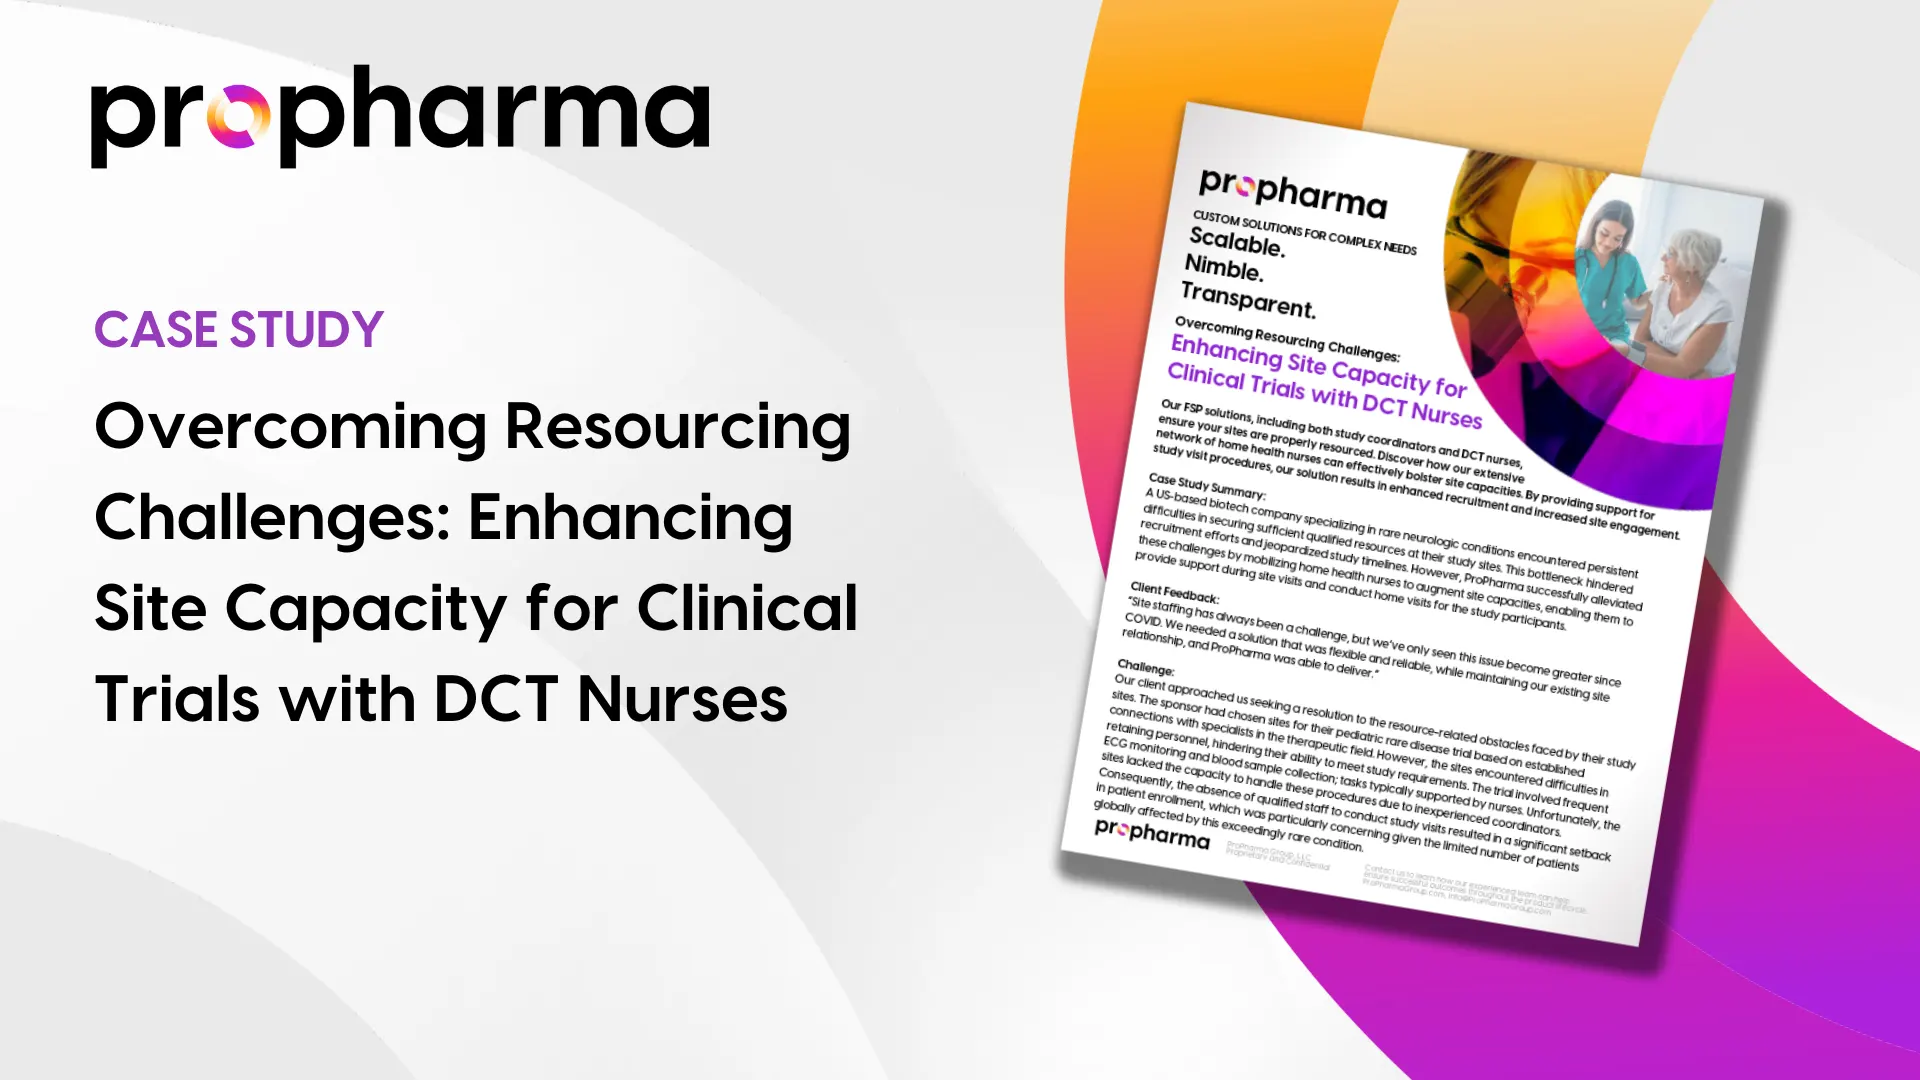 Enhancing Site Capacity for Clinical Trials with DCT Nurses Image